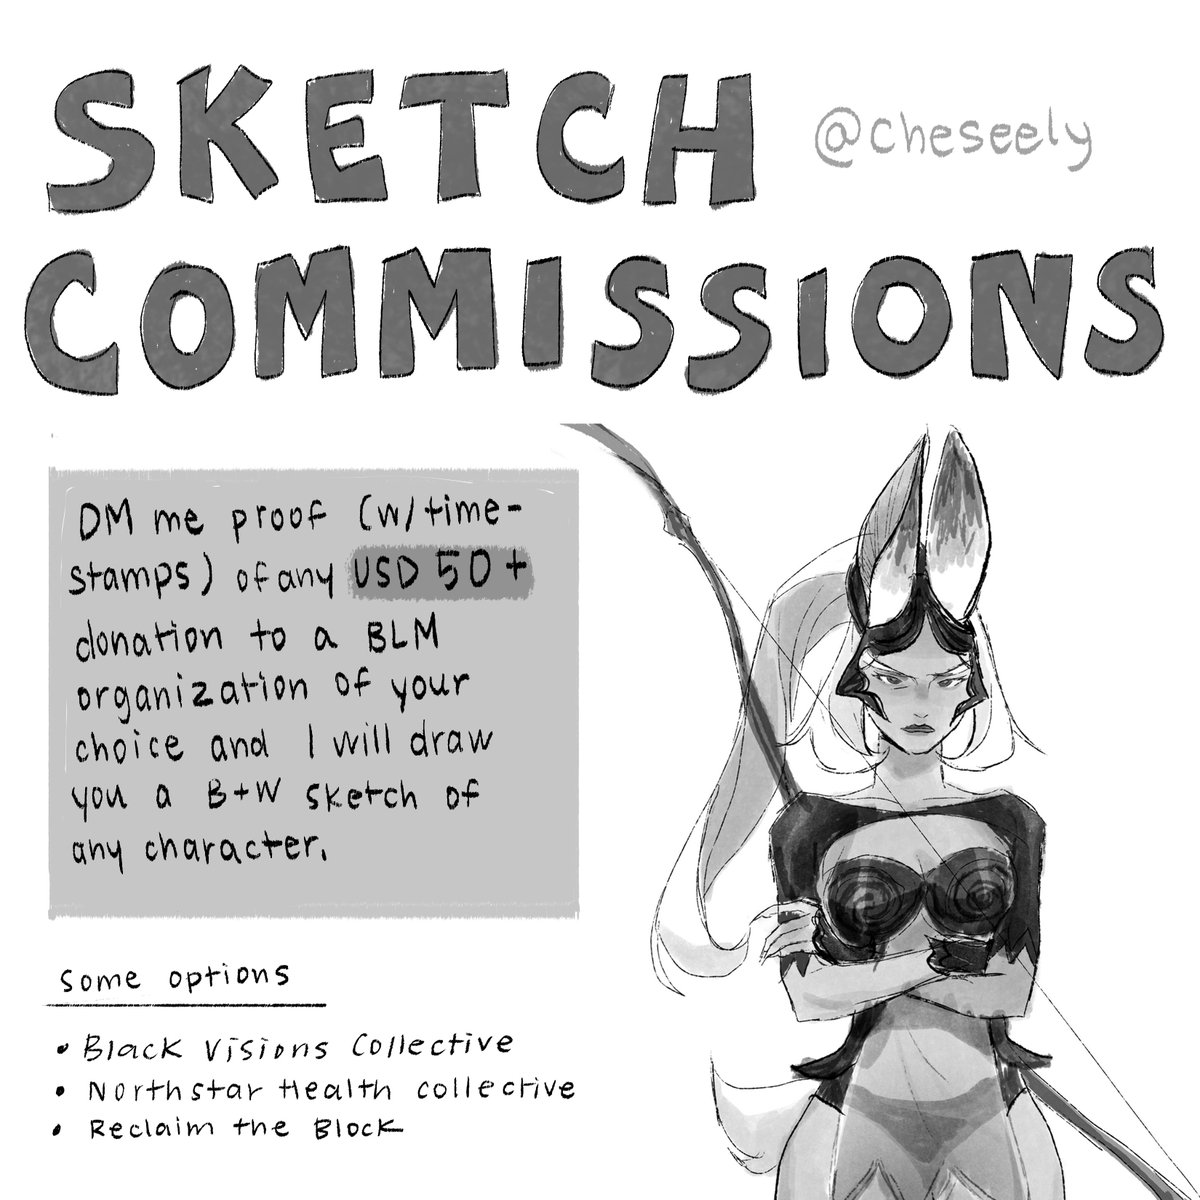 Doing quick sketch commissions for any proof of donations of USD $50 or more (please provide timestamps!) Will provide some links below. Thank you ! 